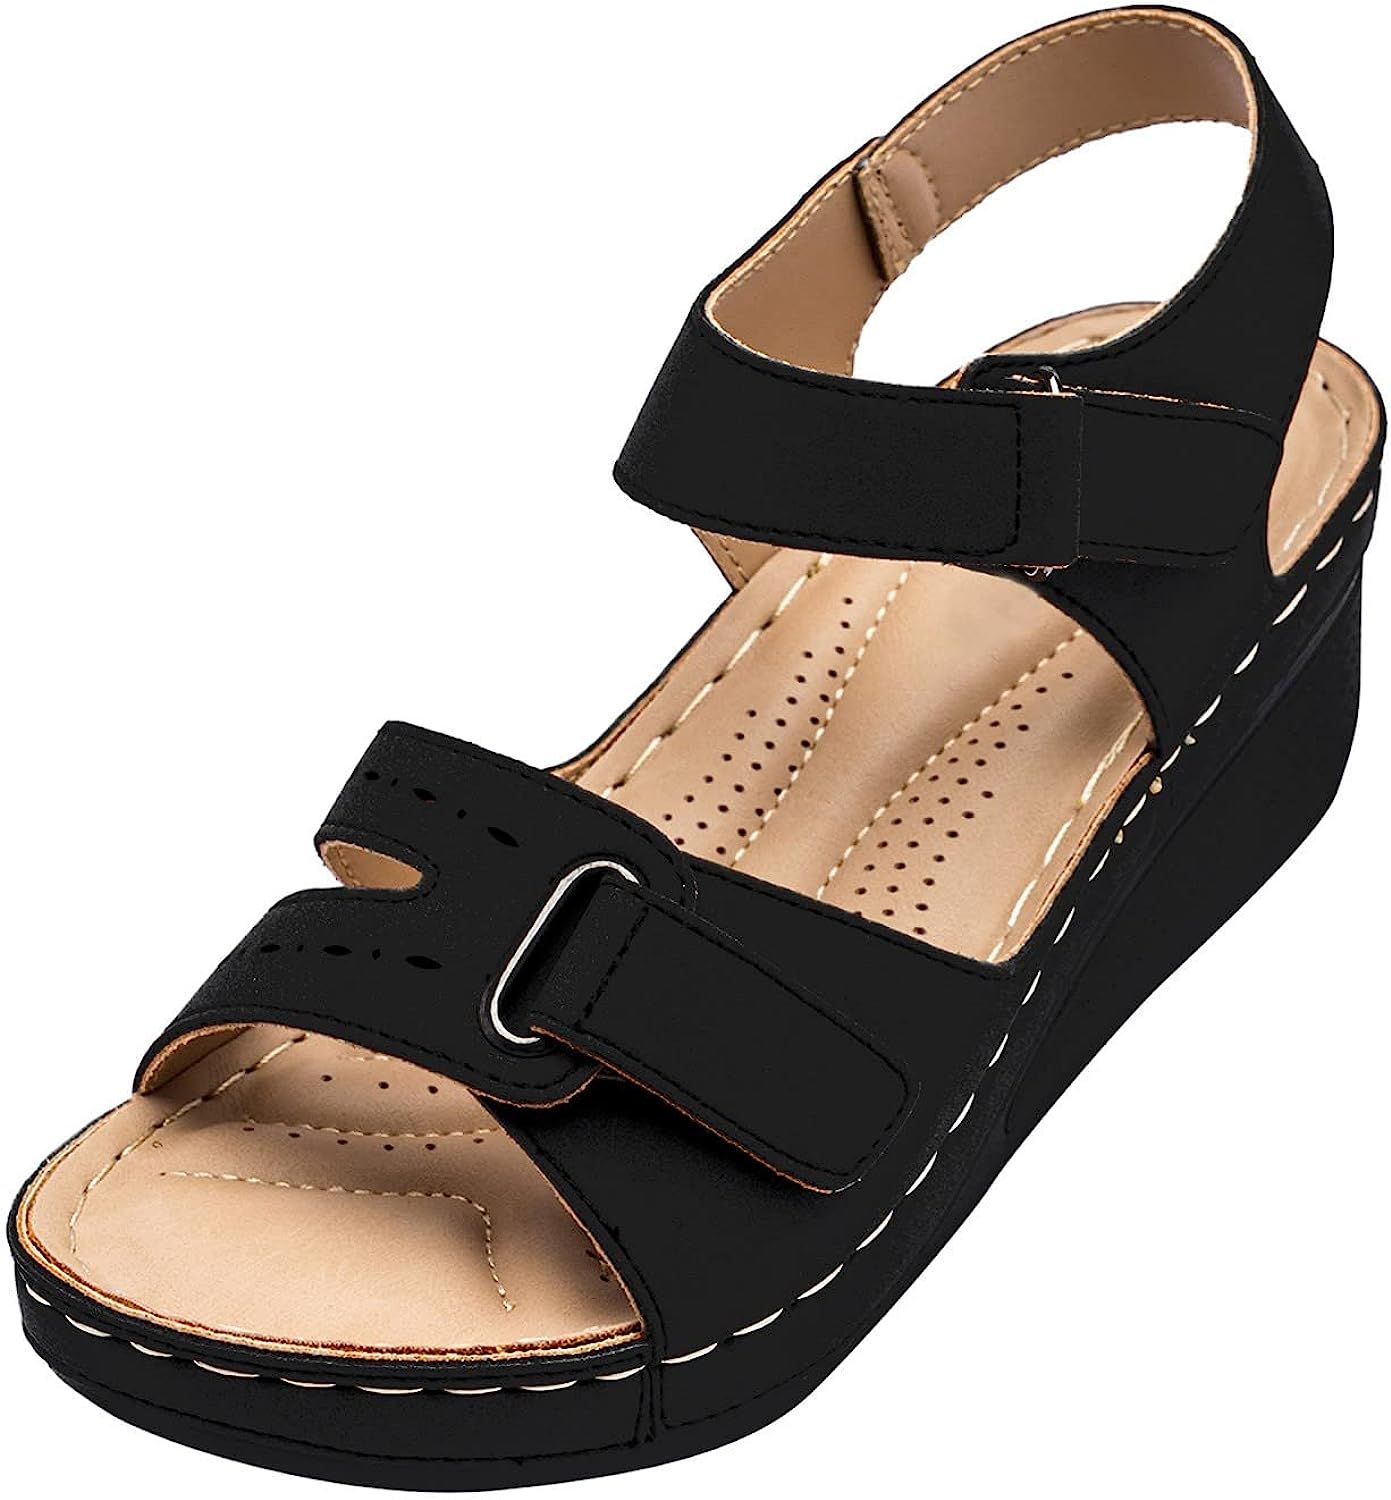 Orthotic Arch Support Sandals Walking Shoes Women [...]